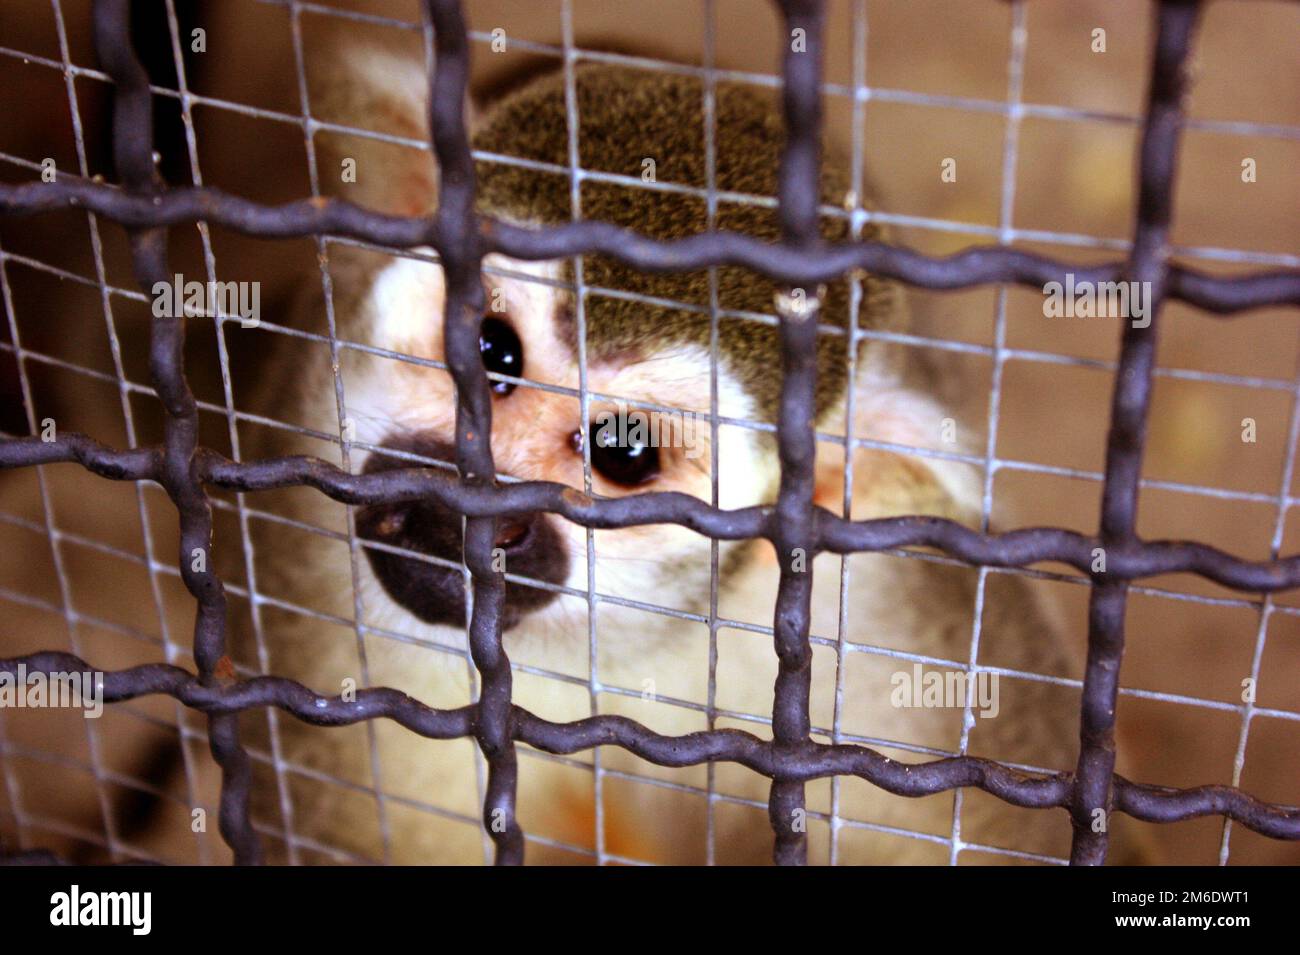 Poor eyes of the little monkey in a cage. Problems of wildlife trafficking. Stock Photo